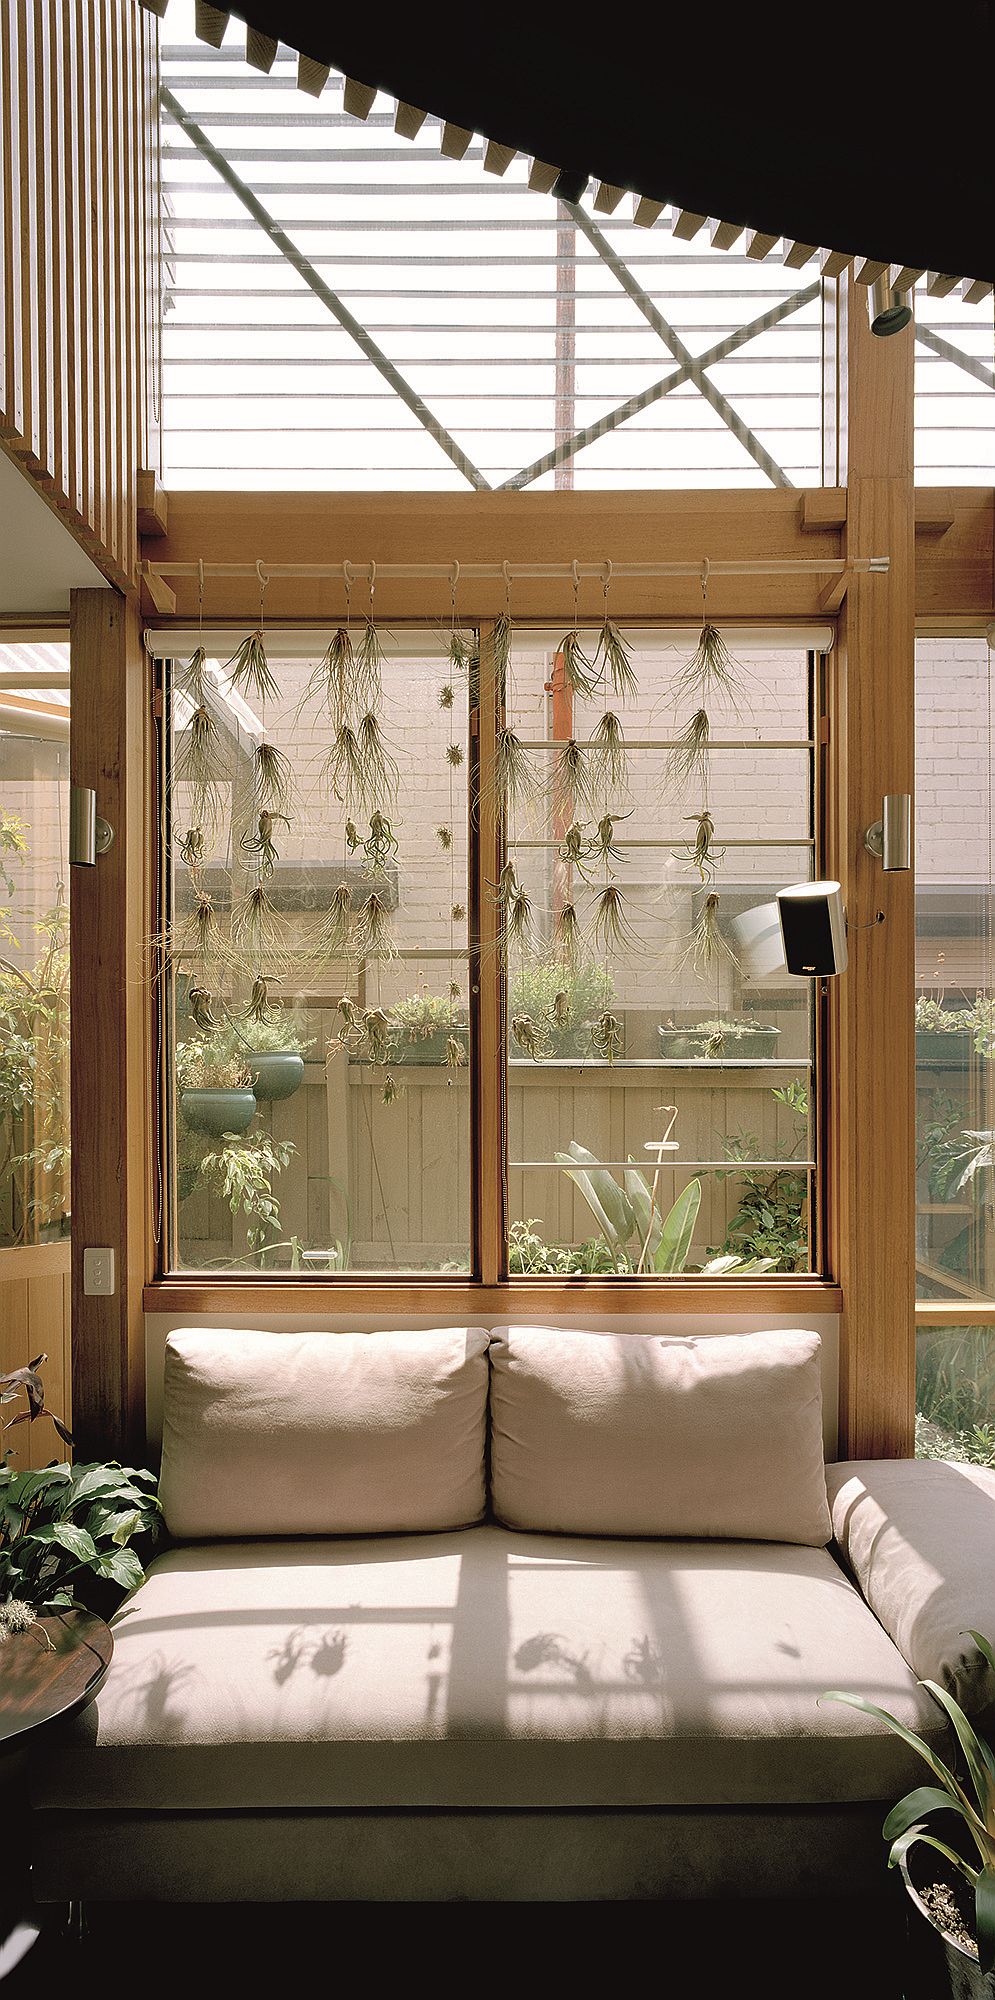 Ingenious-use-of-indoor-plants-and-air-plnts-gives-the-home-a-cloak-of-green